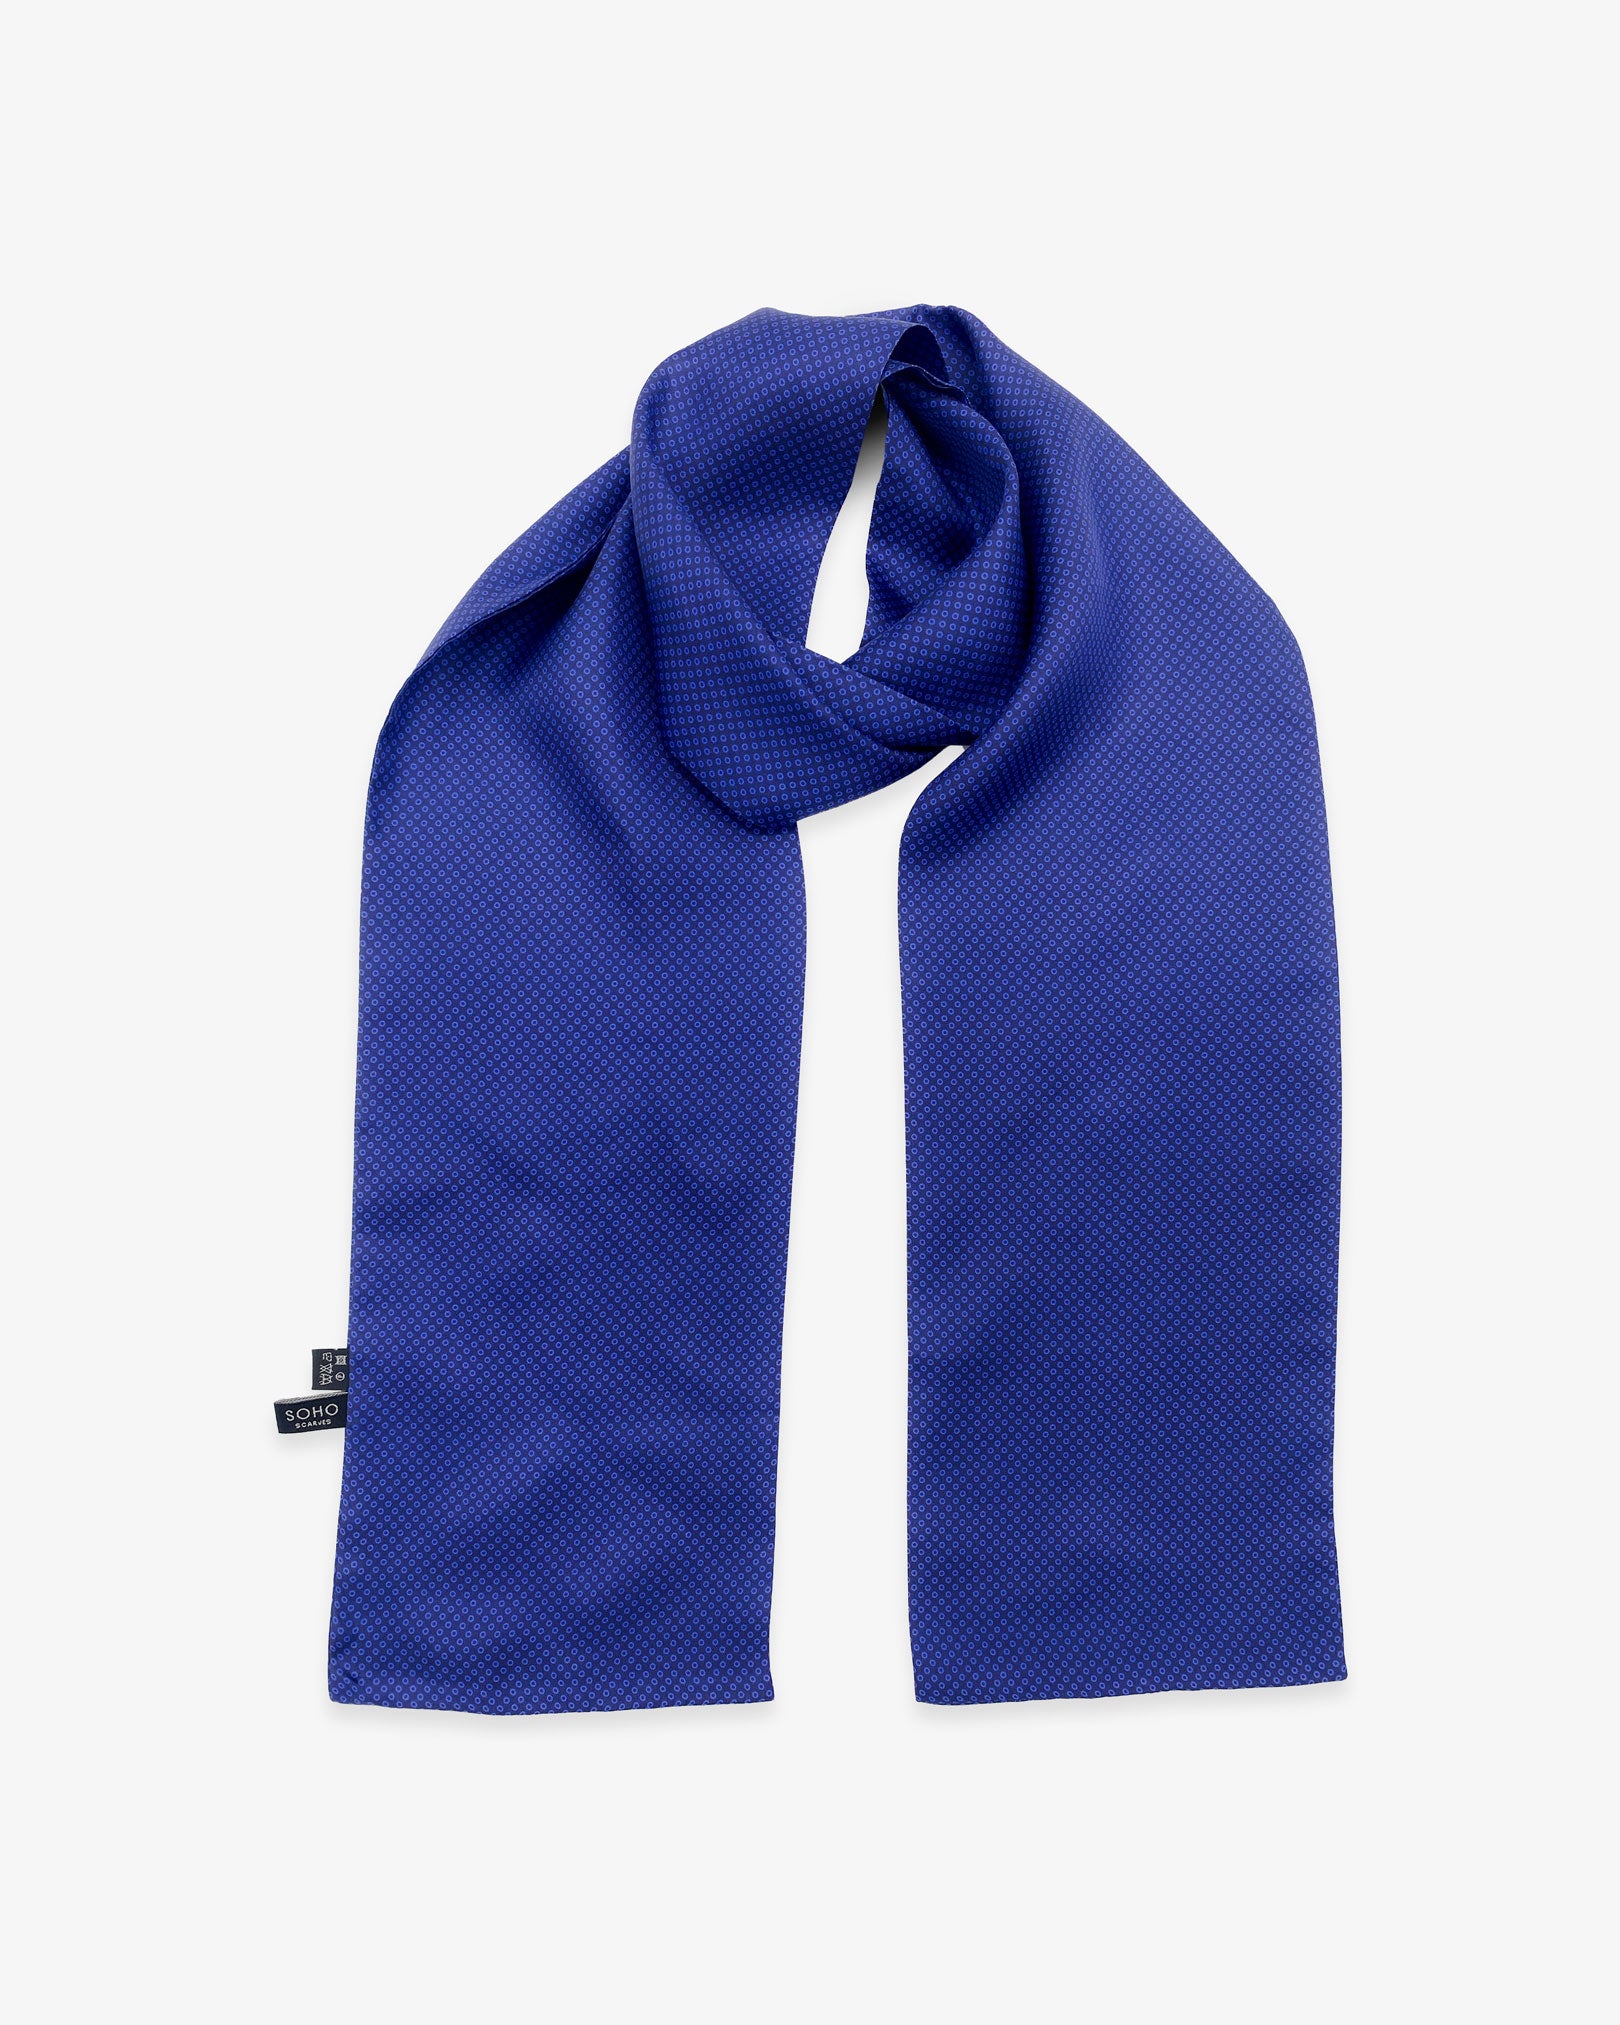 The 'Nakano' silk scarf looped with both ends parallel to effectively display the geometric small blue circles against a dark blue background.